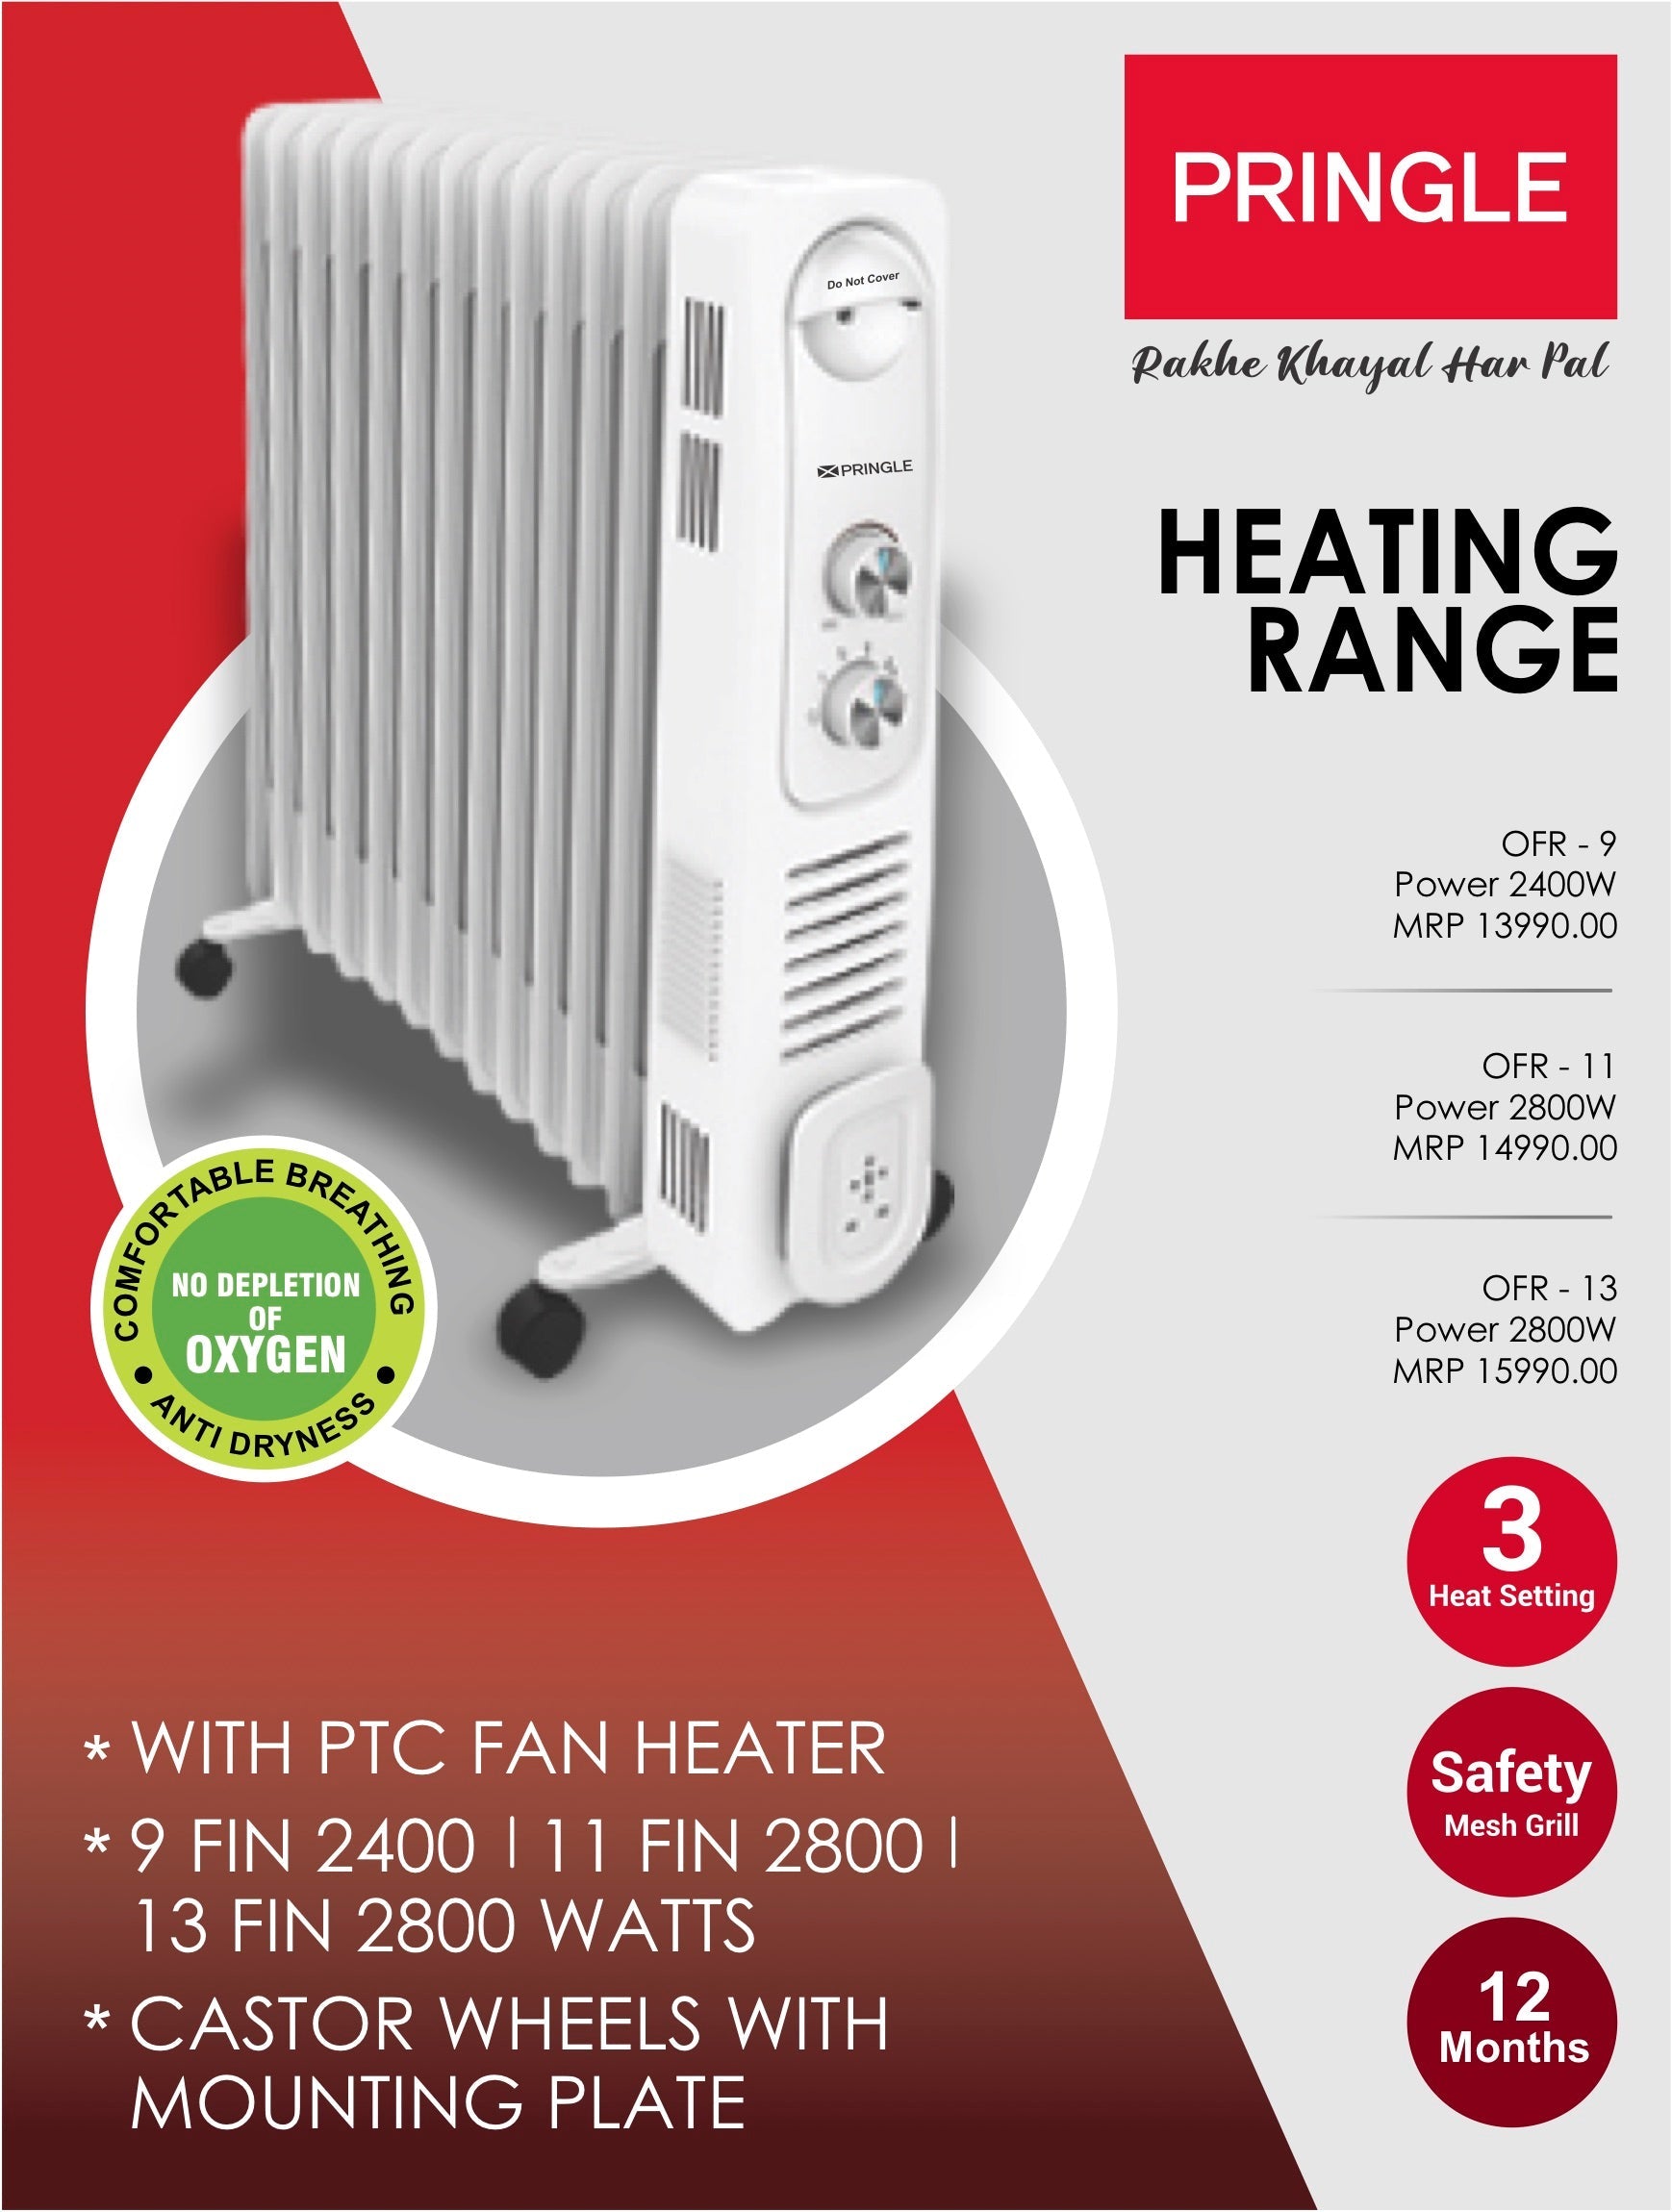 Pringle OFR 9 Fin Room Heater, 2400 Watts (ISI) 5 Stage Air Settings, Multiple Temperature Control, Oil Filled with PTC Radiator Fan Room Heater with Auto Shutoff Low Power (9 Fin (2400 Watt))